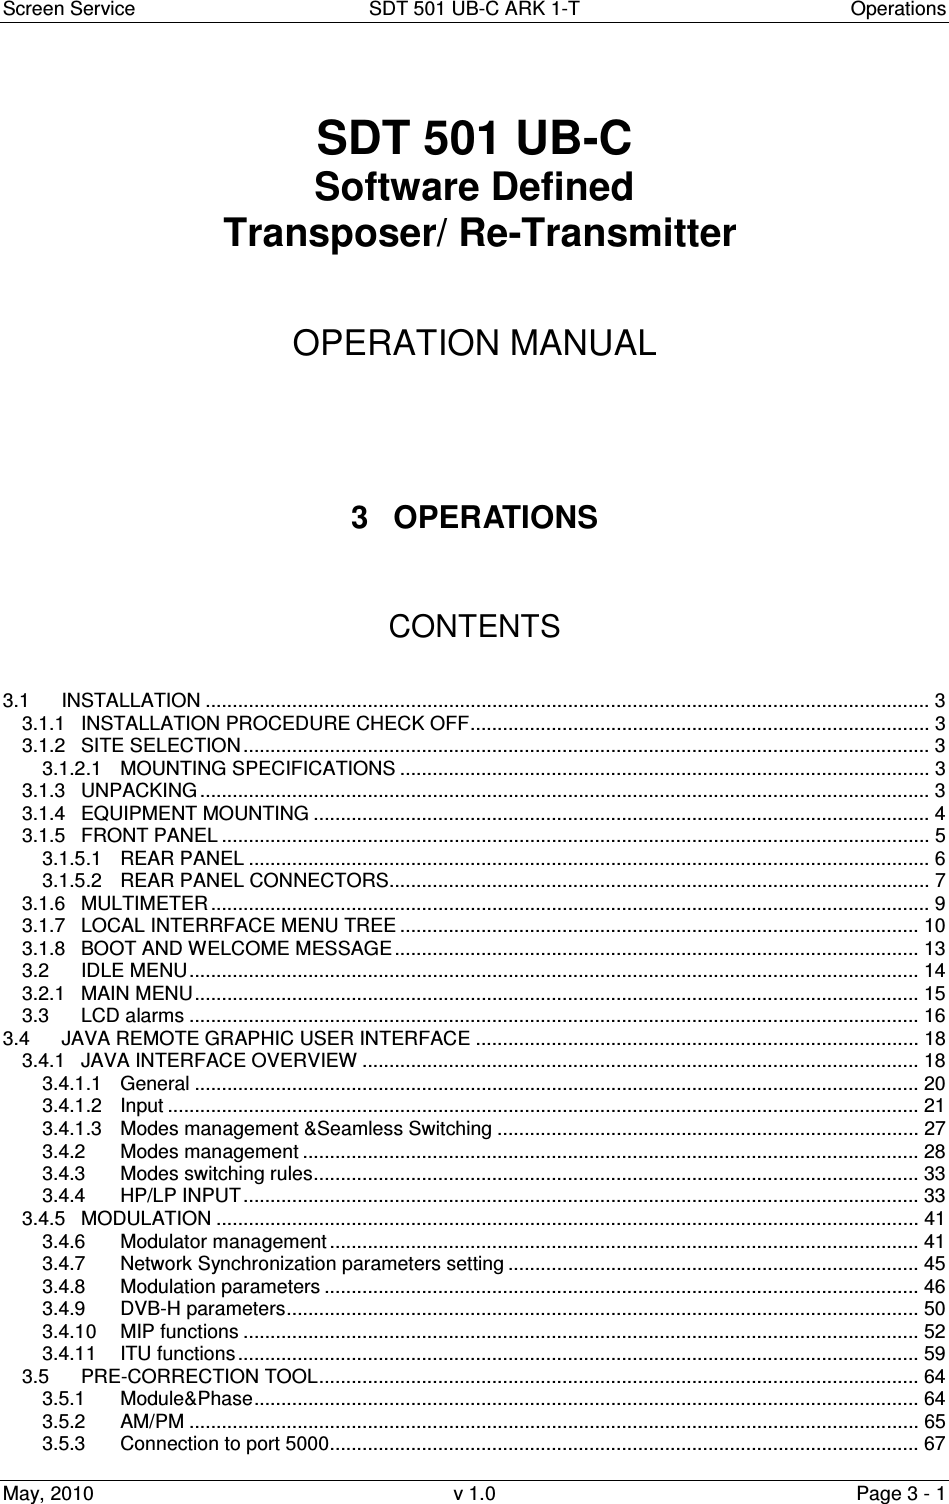 Screen Service  SDT 501 UB-C ARK 1-T  Operations May, 2010  v 1.0  Page 3 - 1   SDT 501 UB-C Software Defined  Transposer/ Re-Transmitter    OPERATION MANUAL      3  OPERATIONS    CONTENTS   3.1 INSTALLATION ...................................................................................................................................... 3 3.1.1 INSTALLATION PROCEDURE CHECK OFF..................................................................................... 3 3.1.2 SITE SELECTION ............................................................................................................................... 3 3.1.2.1 MOUNTING SPECIFICATIONS .................................................................................................. 3 3.1.3 UNPACKING ....................................................................................................................................... 3 3.1.4 EQUIPMENT MOUNTING .................................................................................................................. 4 3.1.5 FRONT PANEL ................................................................................................................................... 5 3.1.5.1 REAR PANEL .............................................................................................................................. 6 3.1.5.2 REAR PANEL CONNECTORS.................................................................................................... 7 3.1.6 MULTIMETER ..................................................................................................................................... 9 3.1.7 LOCAL INTERRFACE MENU TREE ................................................................................................ 10 3.1.8 BOOT AND WELCOME MESSAGE................................................................................................. 13 3.2 IDLE MENU....................................................................................................................................... 14 3.2.1 MAIN MENU...................................................................................................................................... 15 3.3 LCD alarms ....................................................................................................................................... 16 3.4 JAVA REMOTE GRAPHIC USER INTERFACE .................................................................................. 18 3.4.1 JAVA INTERFACE OVERVIEW ....................................................................................................... 18 3.4.1.1 General ...................................................................................................................................... 20 3.4.1.2 Input ........................................................................................................................................... 21 3.4.1.3 Modes management &amp;Seamless Switching .............................................................................. 27 3.4.2 Modes management .................................................................................................................. 28 3.4.3 Modes switching rules................................................................................................................ 33 3.4.4 HP/LP INPUT............................................................................................................................. 33 3.4.5 MODULATION .................................................................................................................................. 41 3.4.6 Modulator management ............................................................................................................. 41 3.4.7 Network Synchronization parameters setting ............................................................................ 45 3.4.8 Modulation parameters .............................................................................................................. 46 3.4.9 DVB-H parameters..................................................................................................................... 50 3.4.10 MIP functions ............................................................................................................................. 52 3.4.11 ITU functions.............................................................................................................................. 59 3.5 PRE-CORRECTION TOOL............................................................................................................... 64 3.5.1 Module&amp;Phase........................................................................................................................... 64 3.5.2 AM/PM ....................................................................................................................................... 65 3.5.3 Connection to port 5000............................................................................................................. 67 